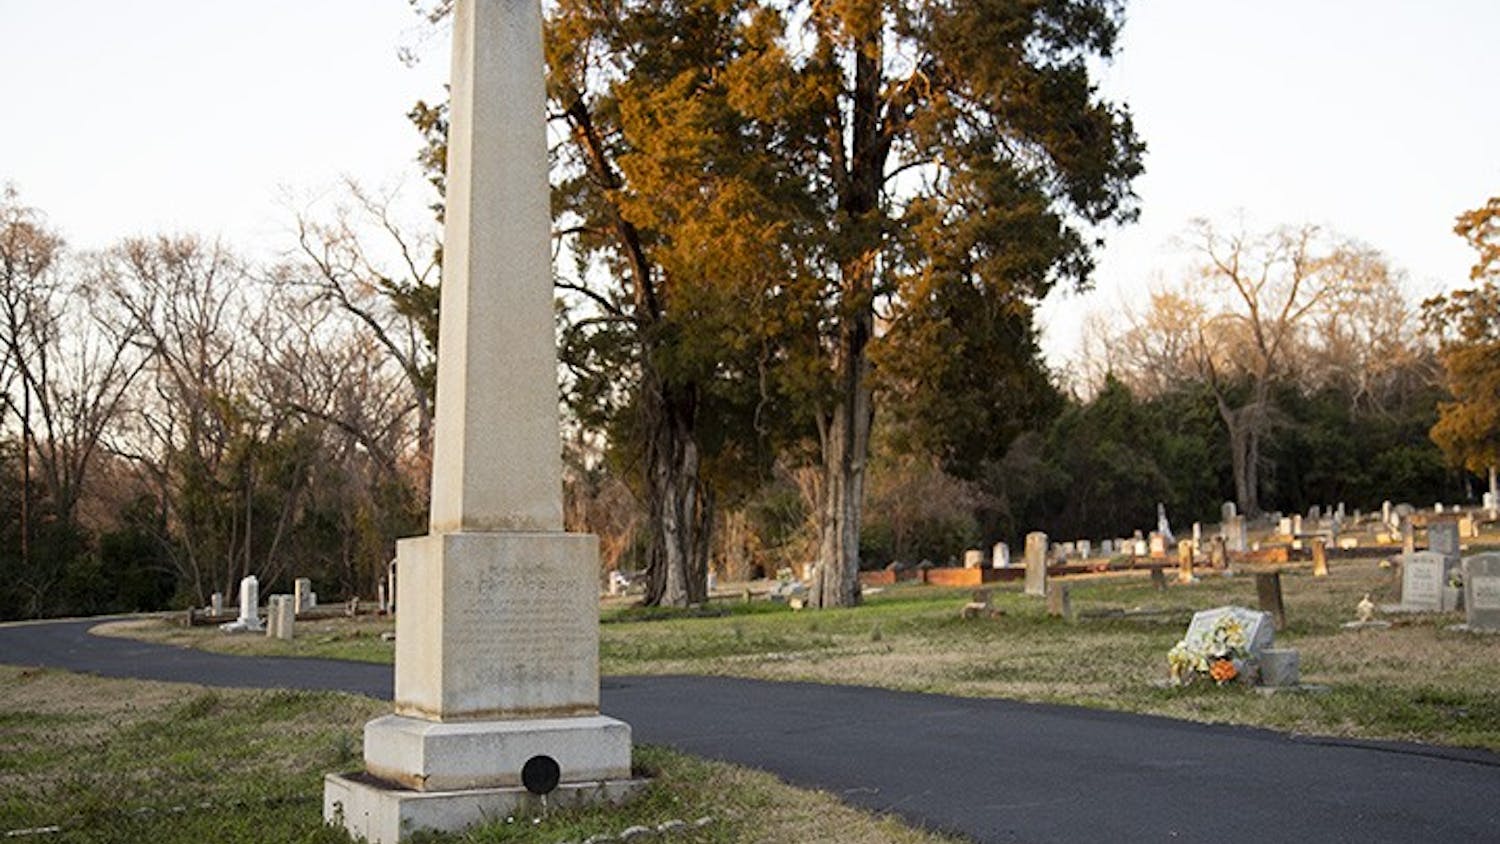 Senator Benjamin Randolph's grave located in Randolph Cemetery, which is named in his honor.